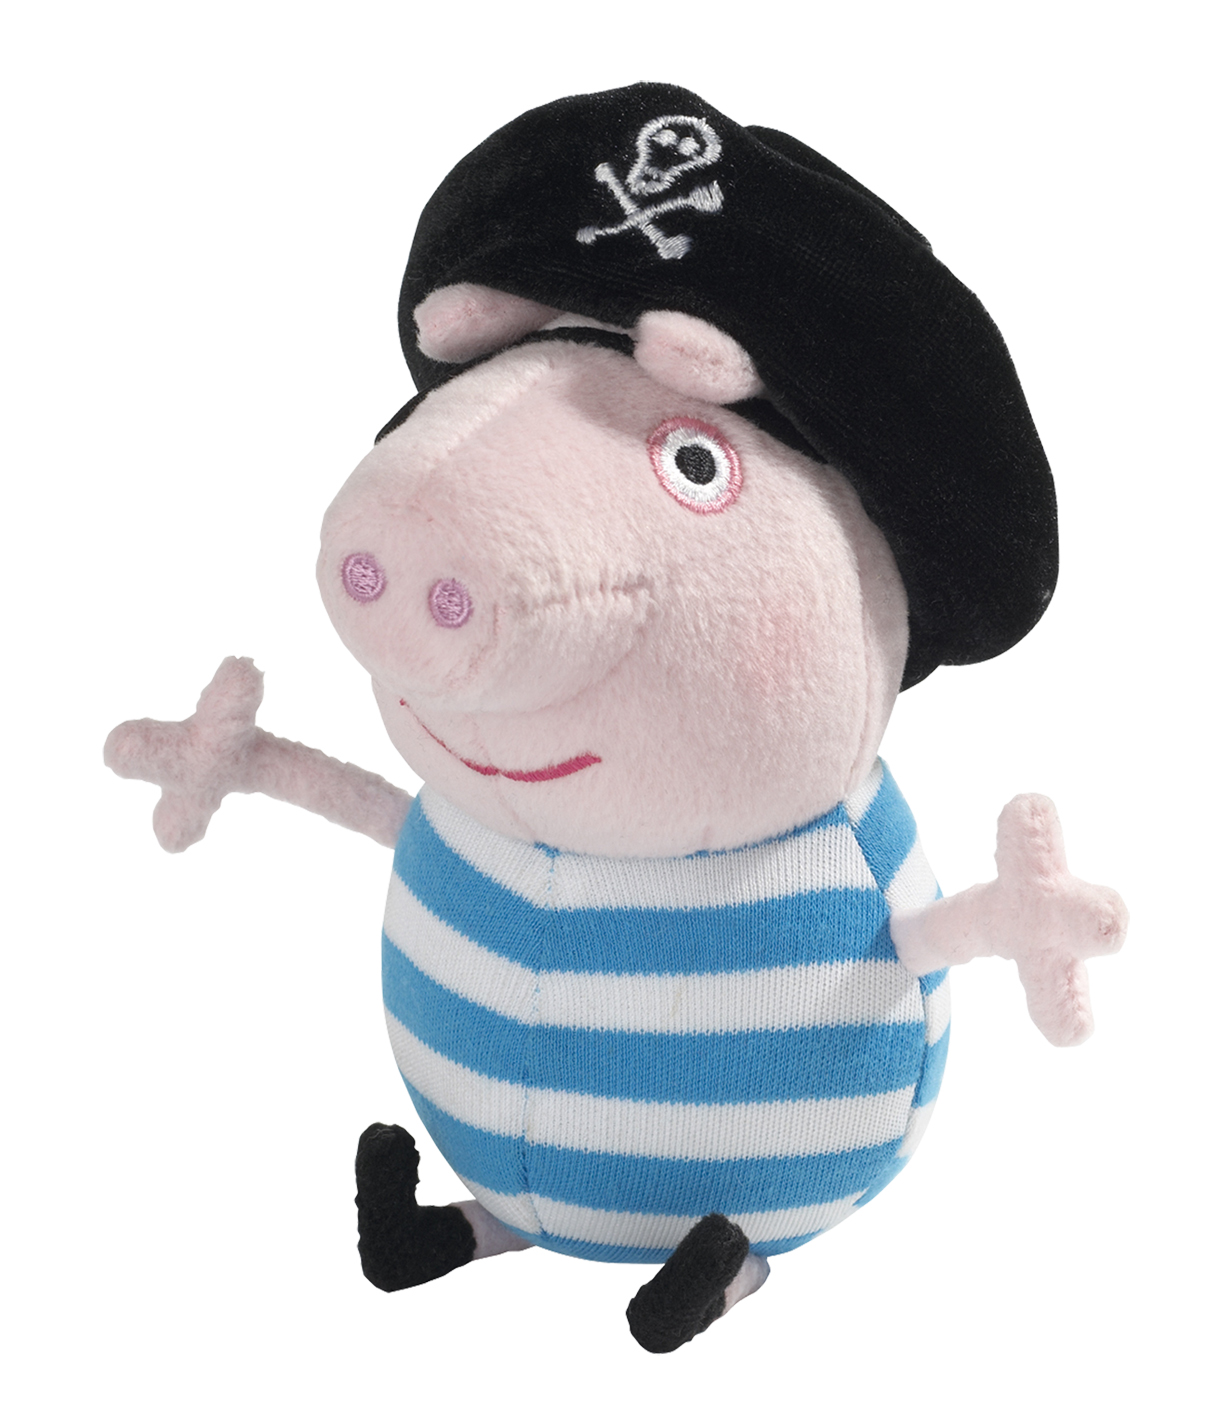 Plush Collectables - Pirate George